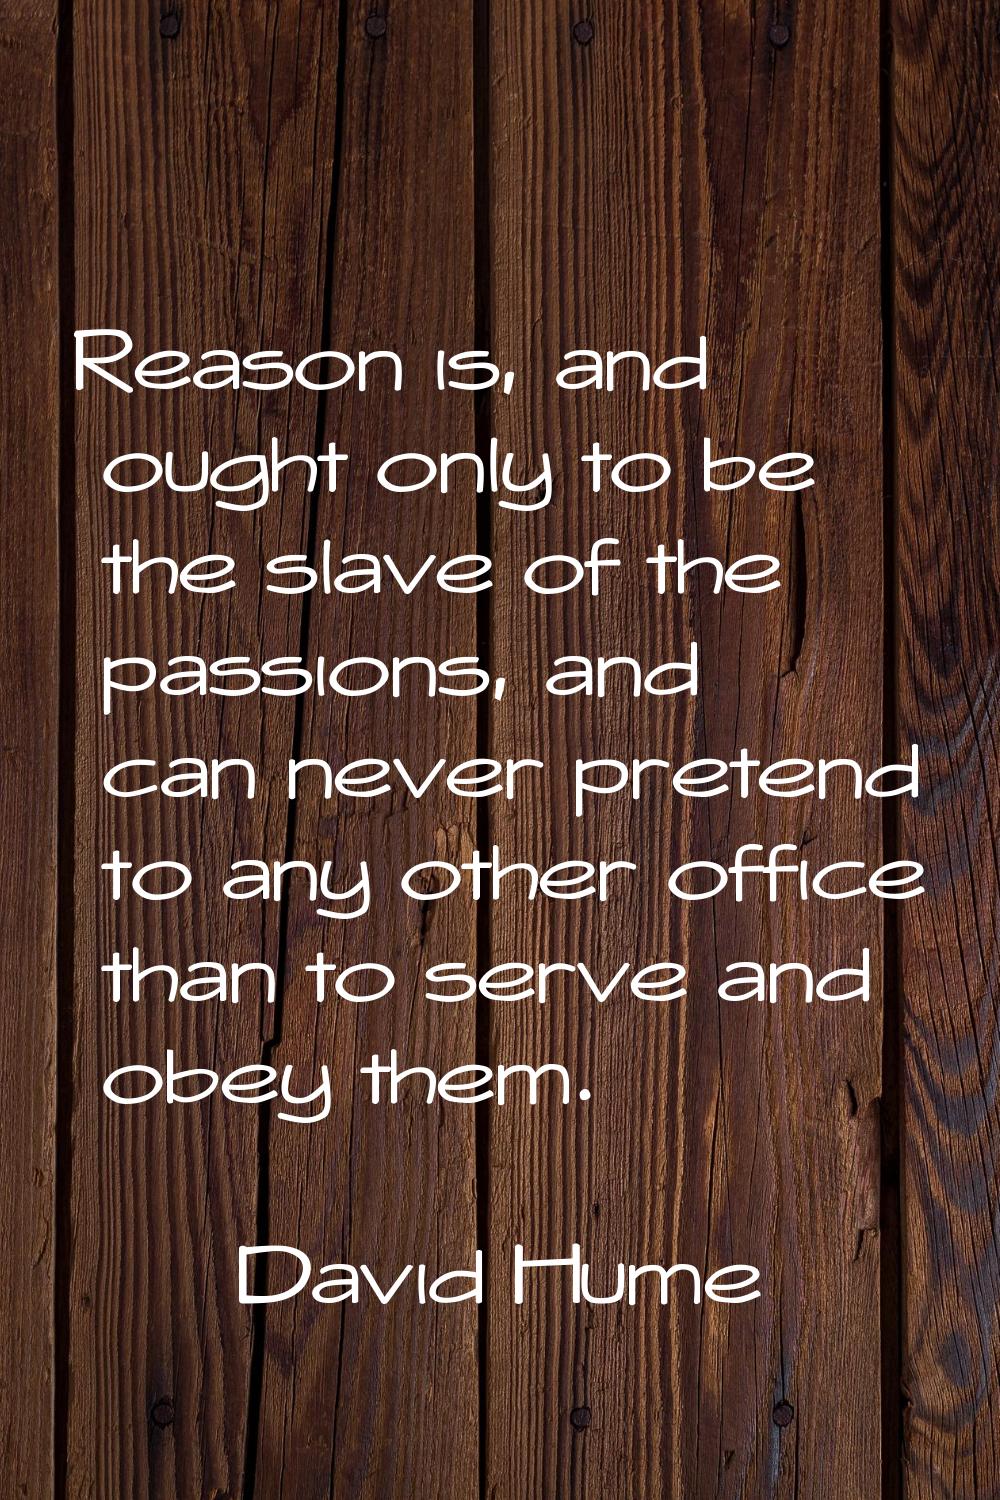 Reason is, and ought only to be the slave of the passions, and can never pretend to any other offic